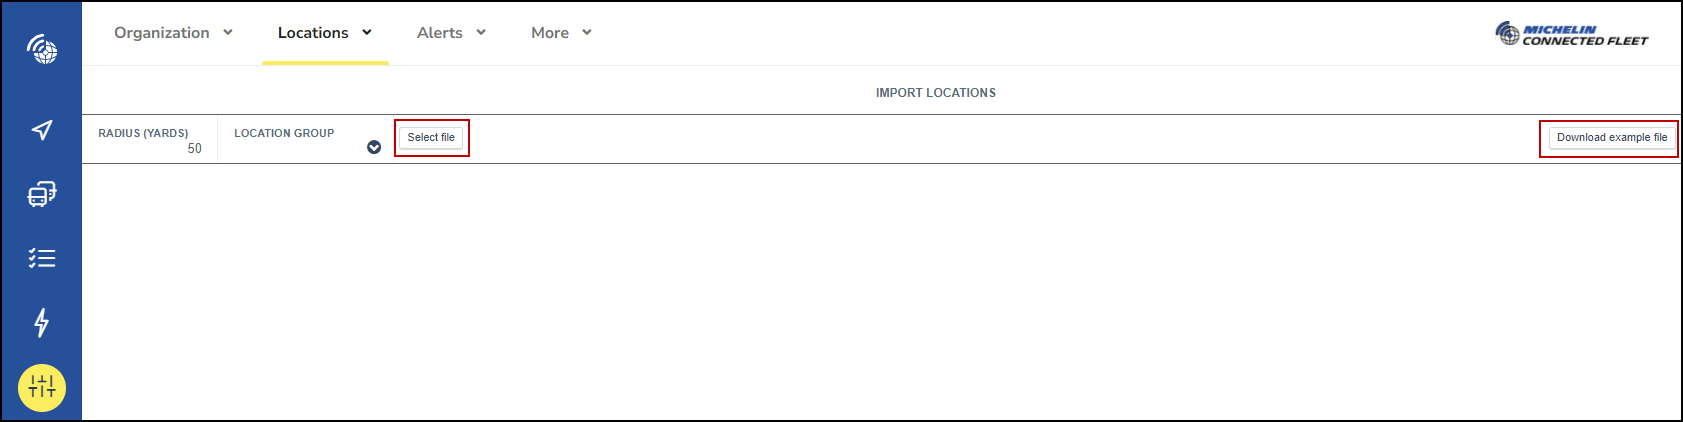 Radius and Location Group are defined for all locations when using the import 